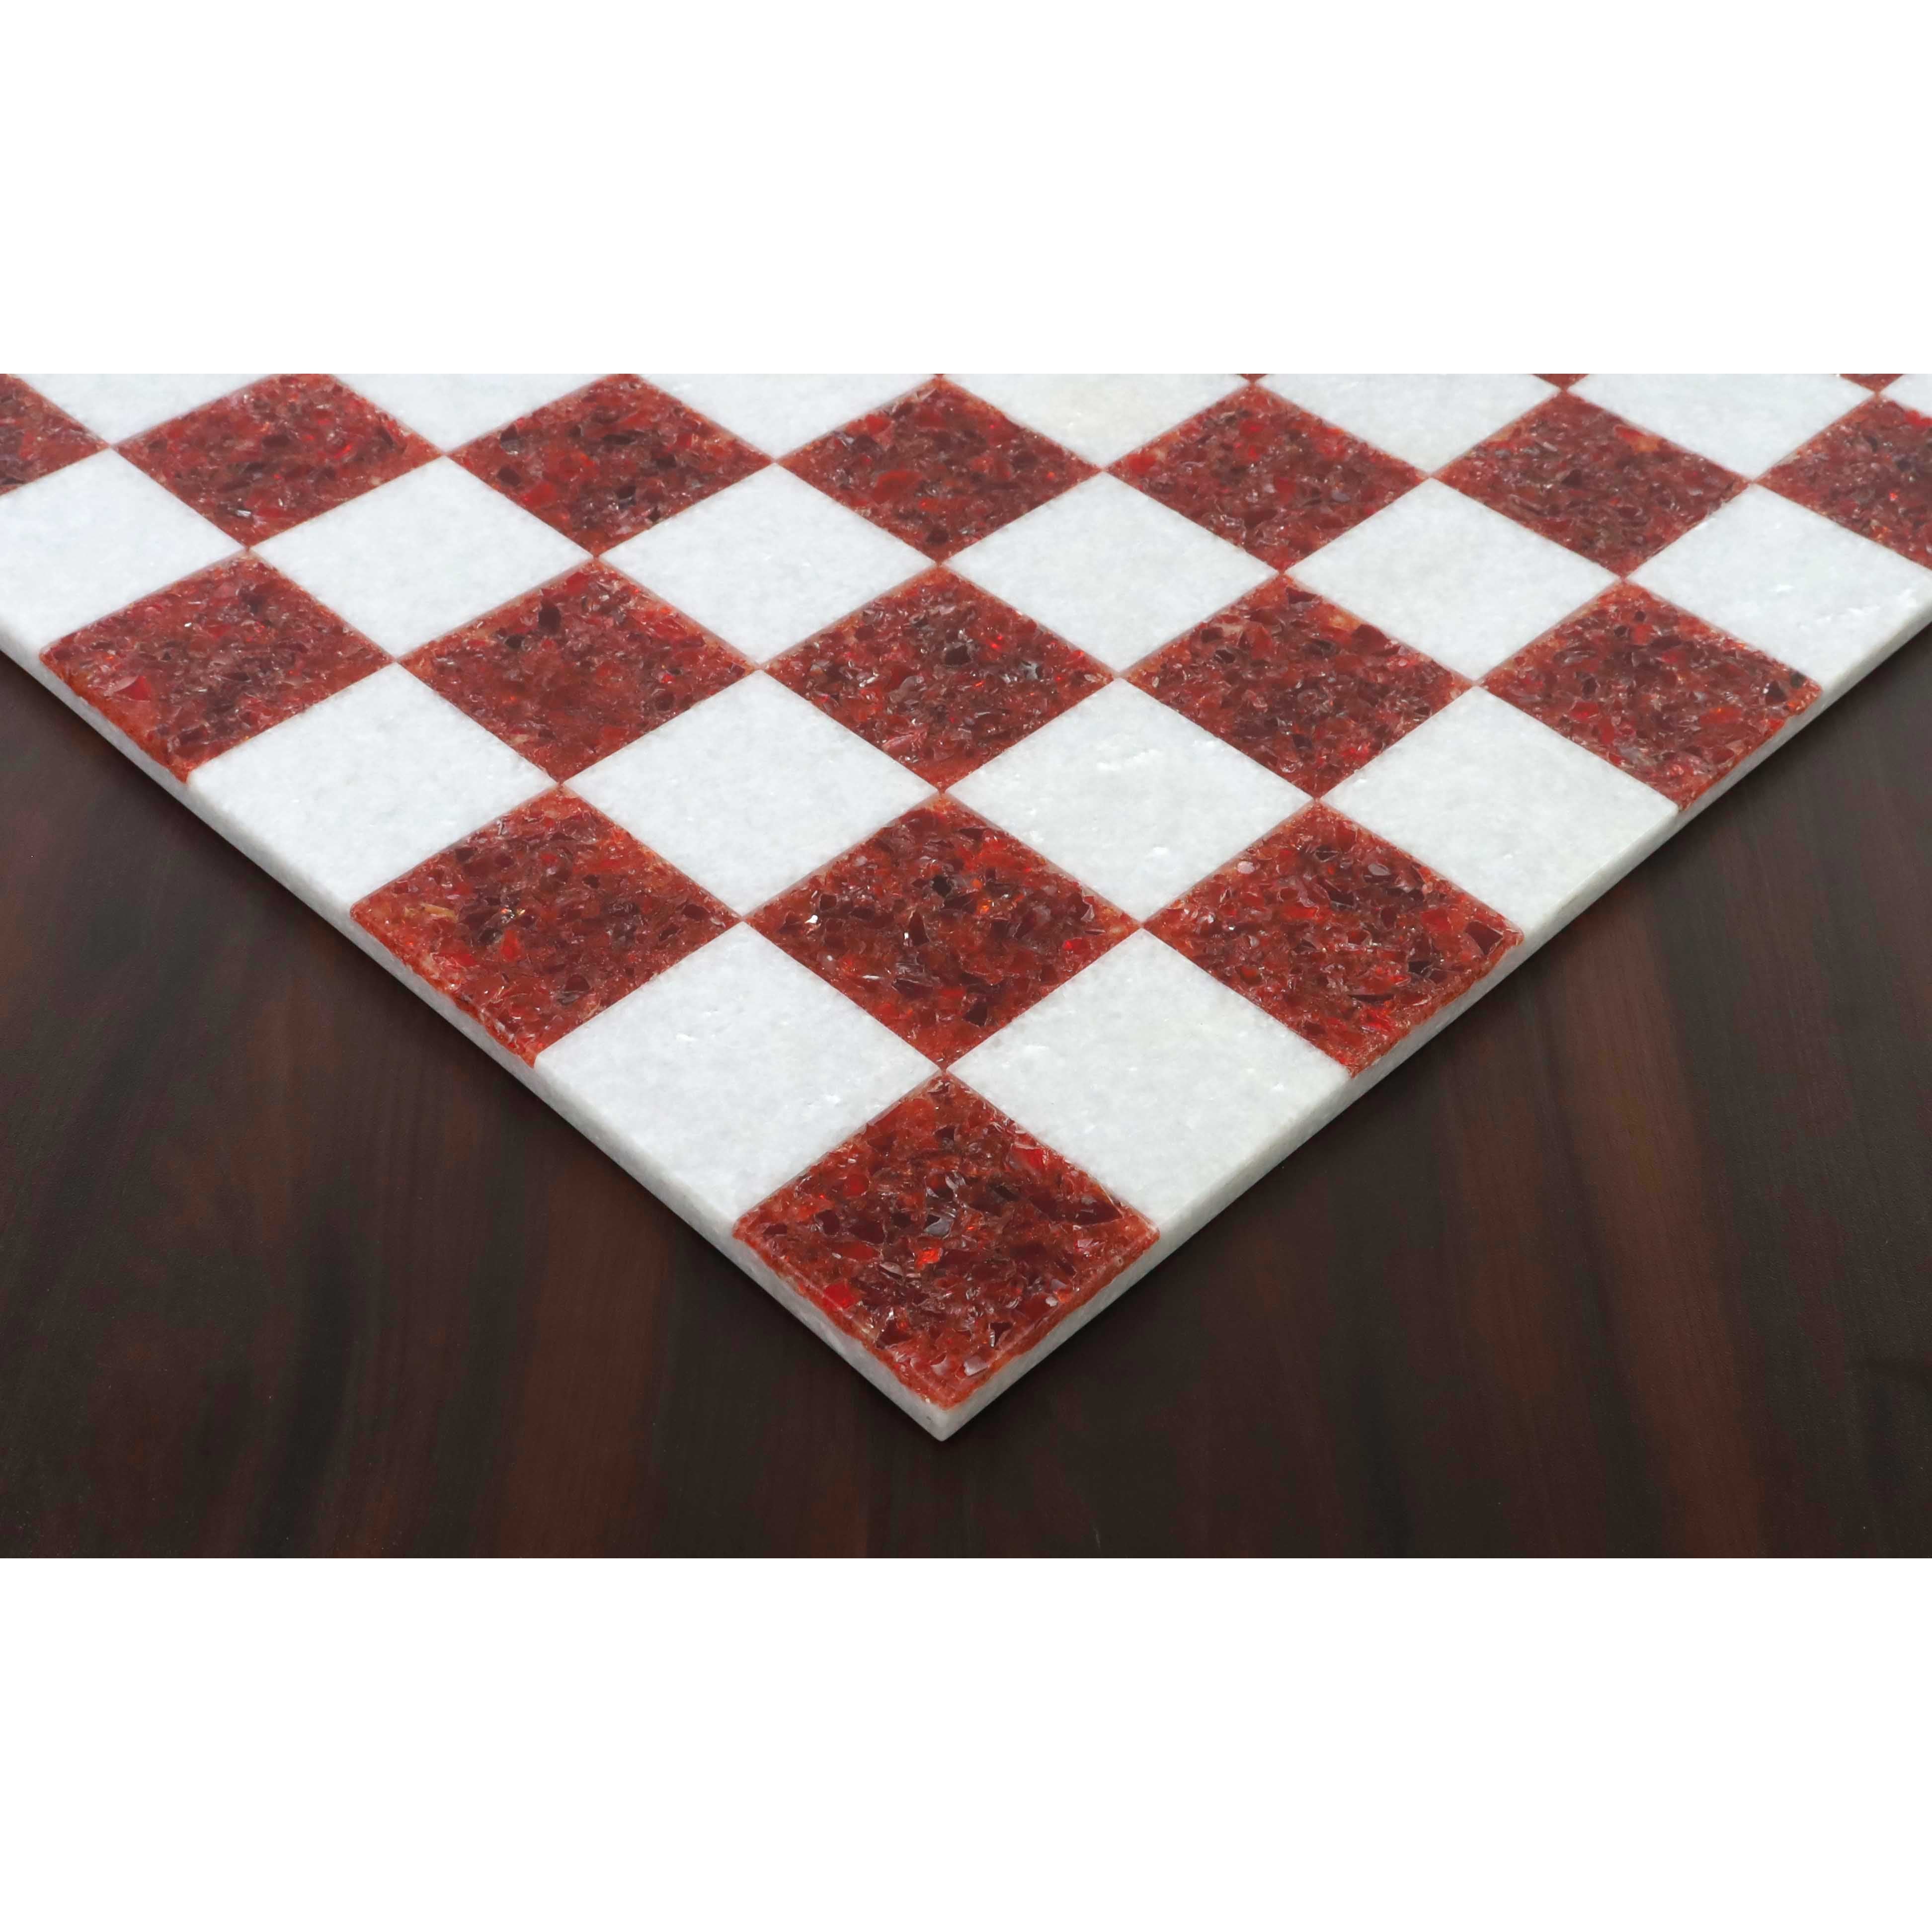 18'' Borderless Marble Stone Luxury Chess Board - Red and White Stone